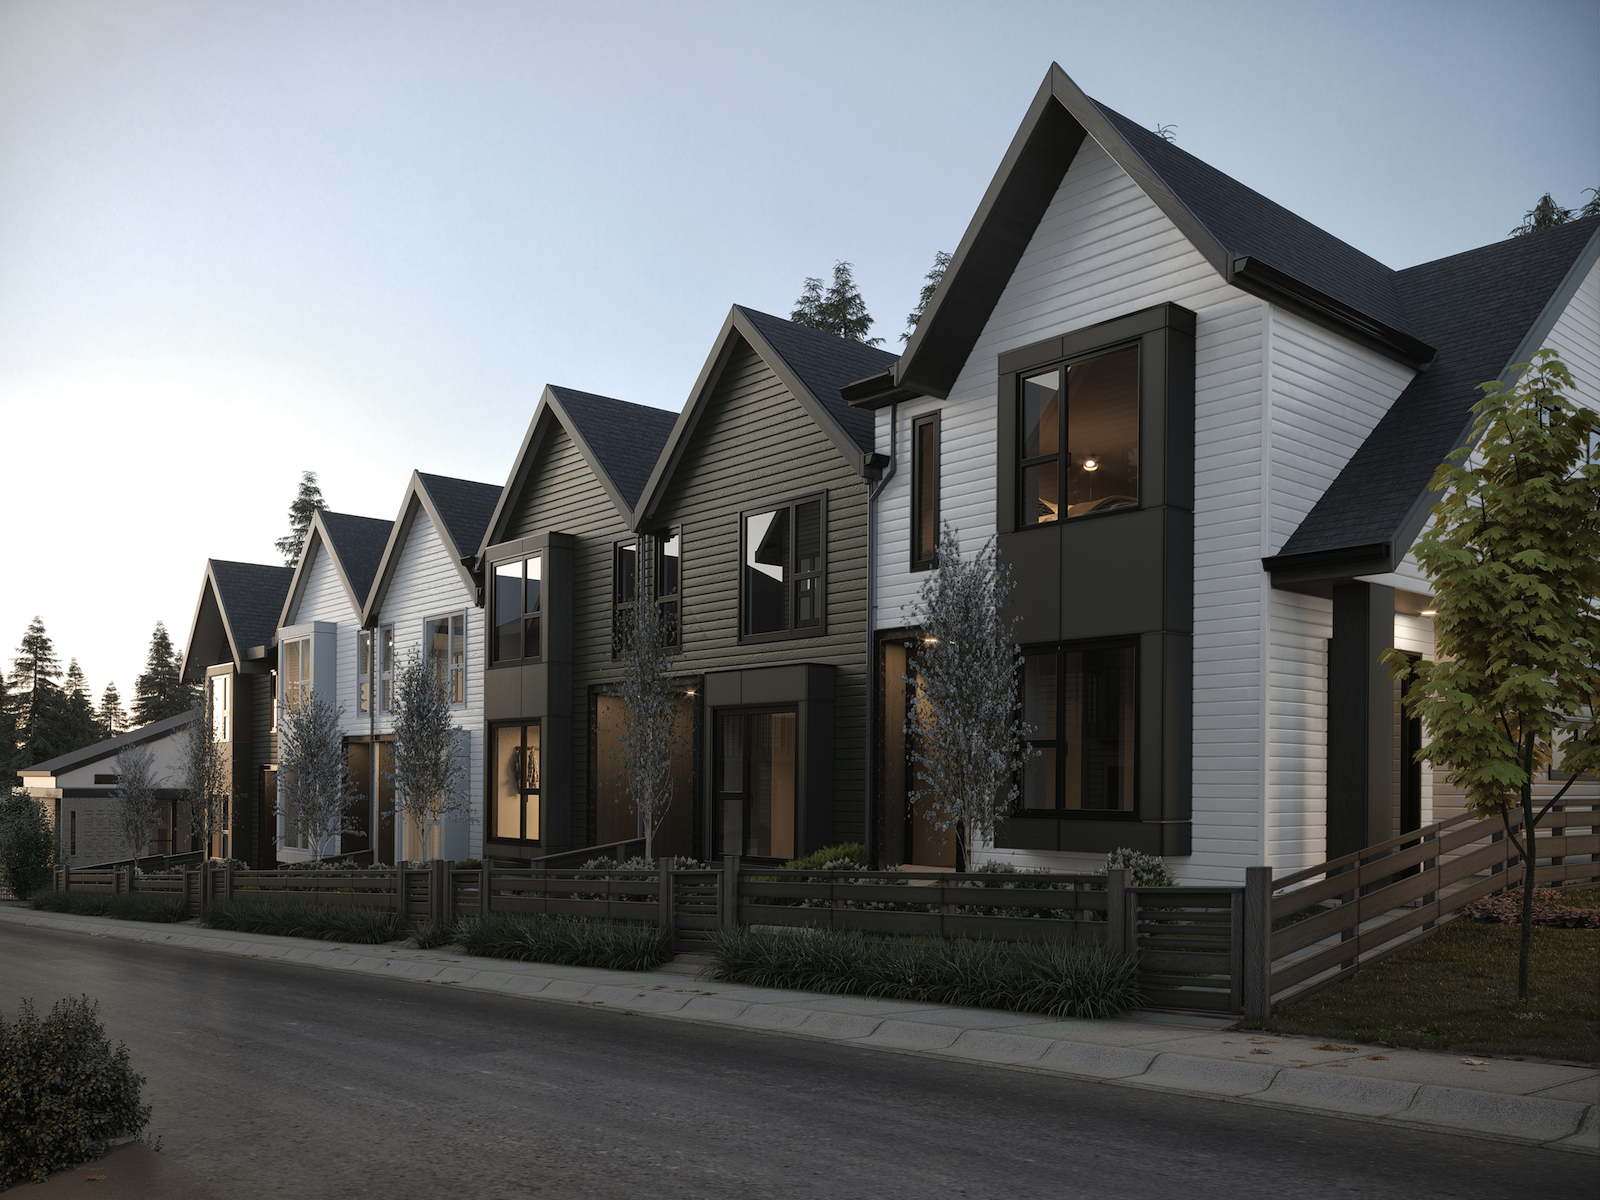 Coming soon to Coquitlam, Aalto Townhomes designed by Ramsay Worden Architects.